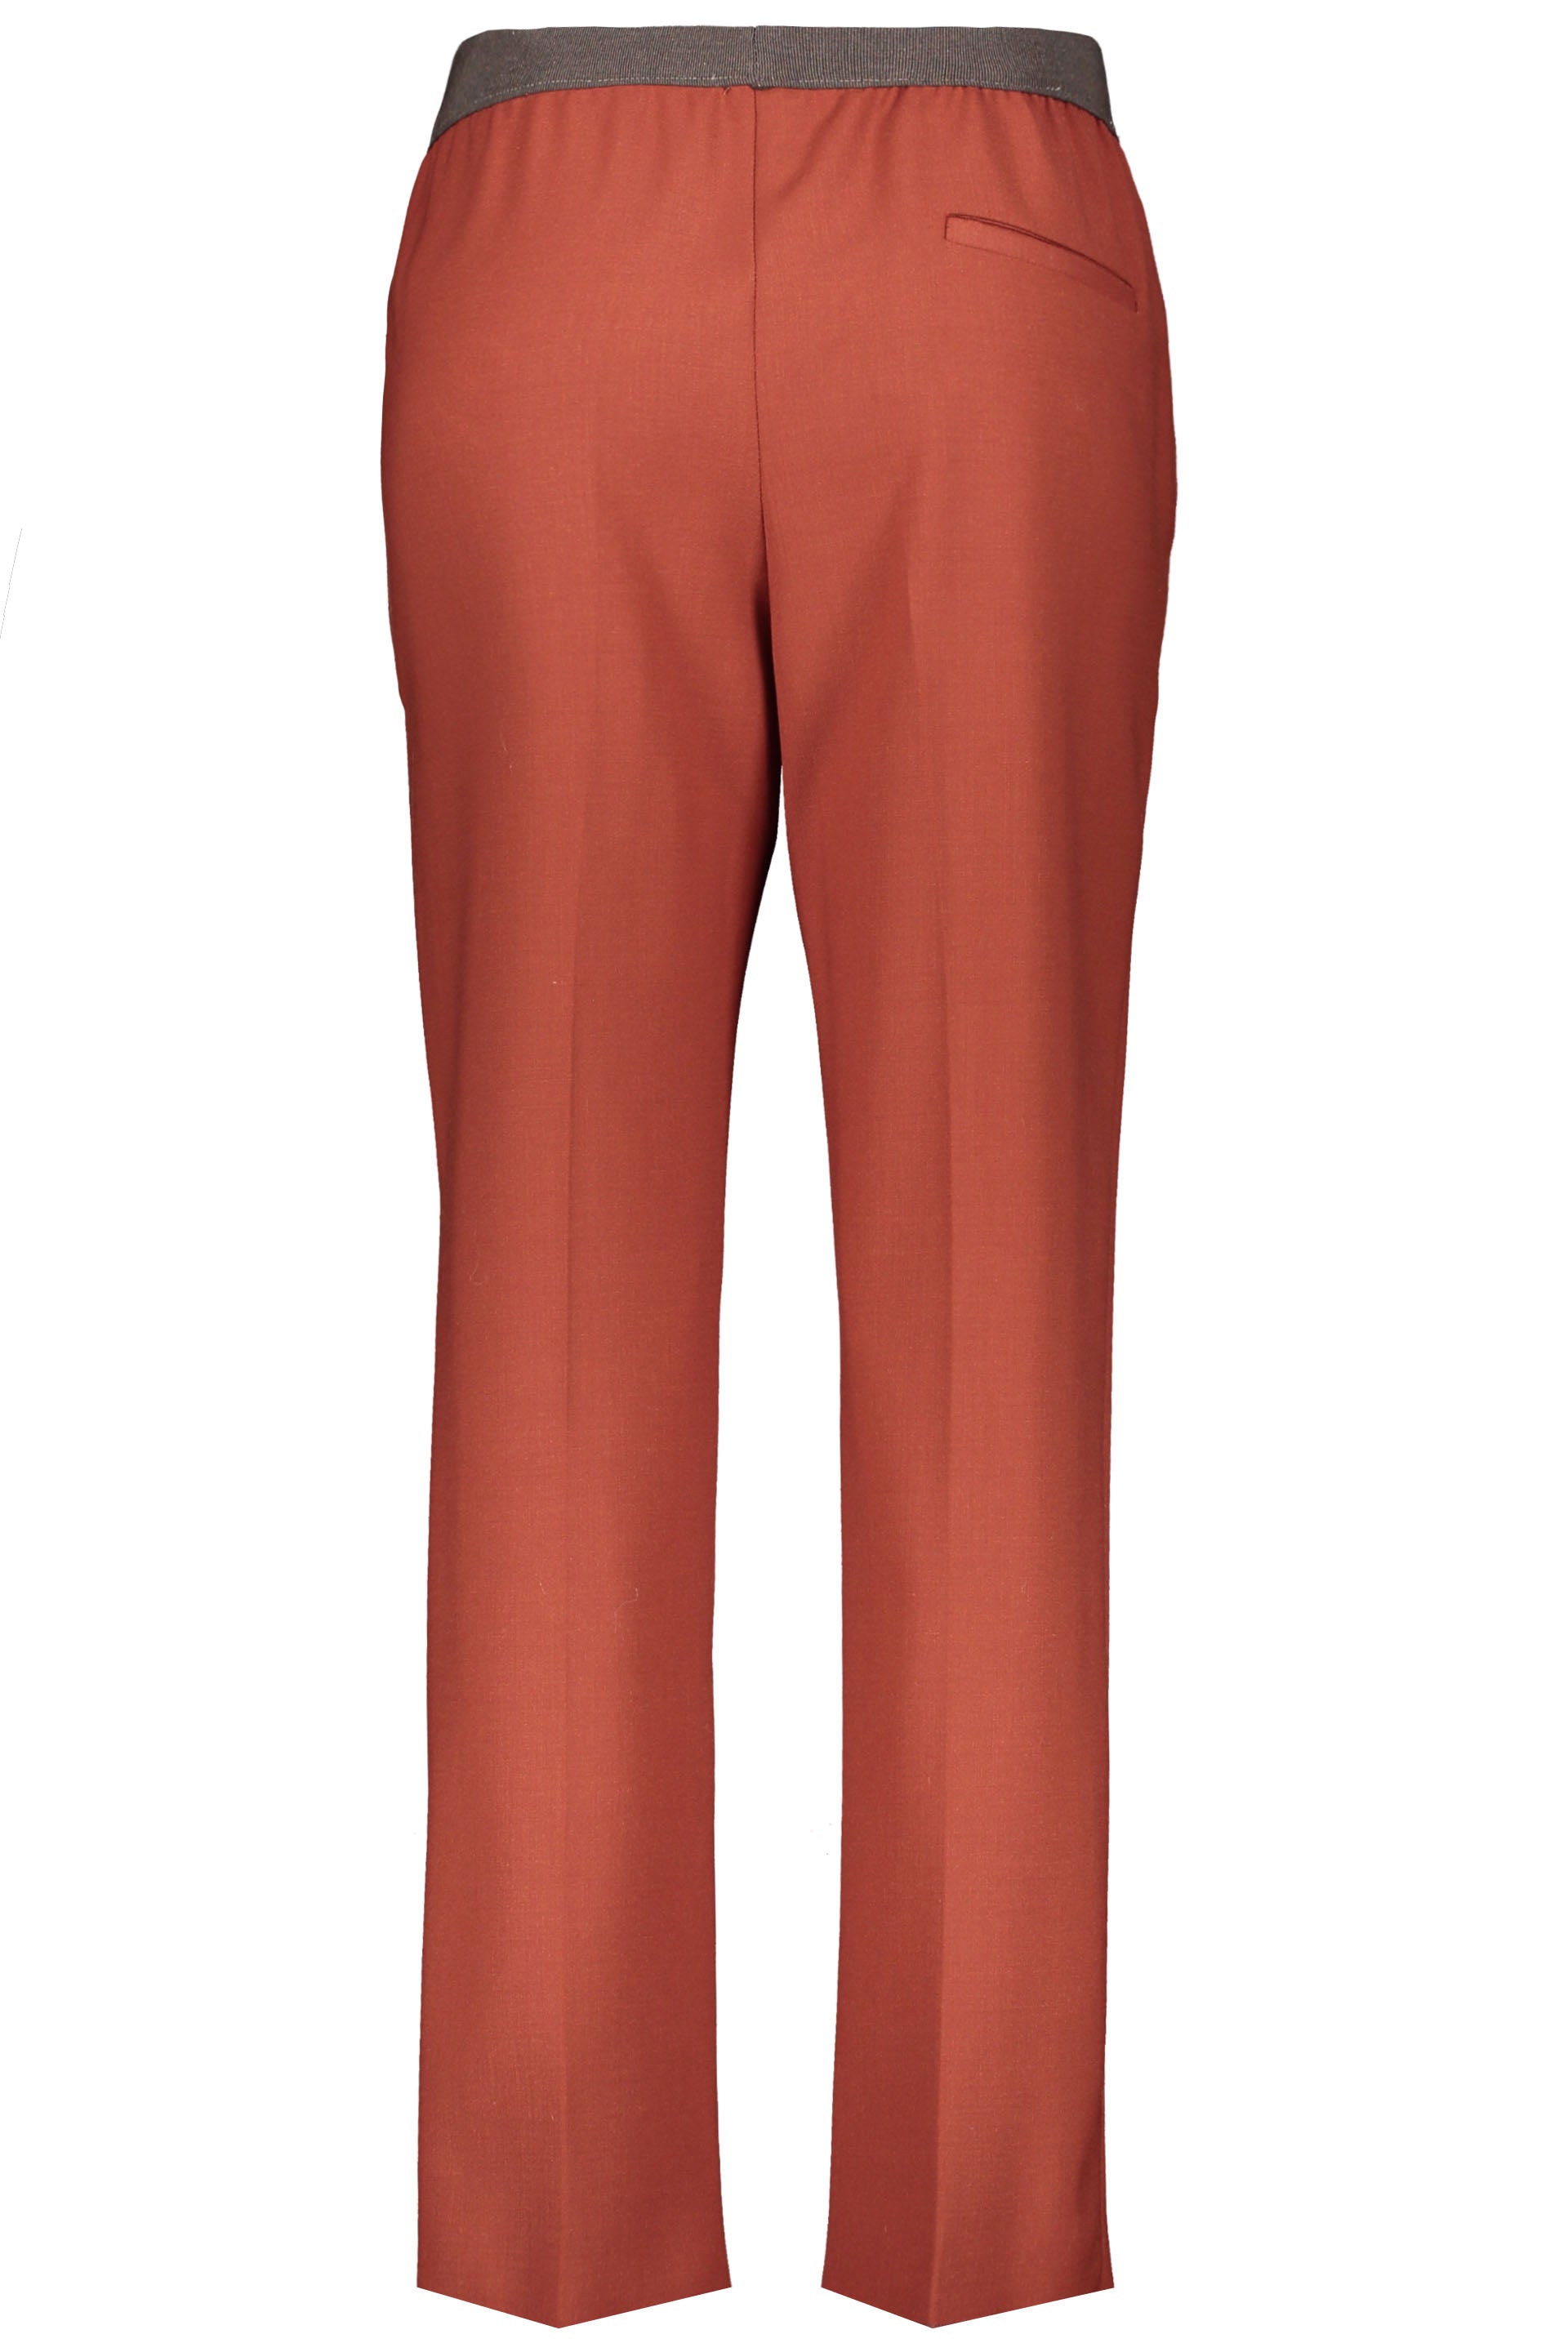 Agnona-OUTLET-SALE-Long-trousers-Hosen-ARCHIVE-COLLECTION-2_caadef07-1b54-4a84-b968-35c771699b1c.jpg